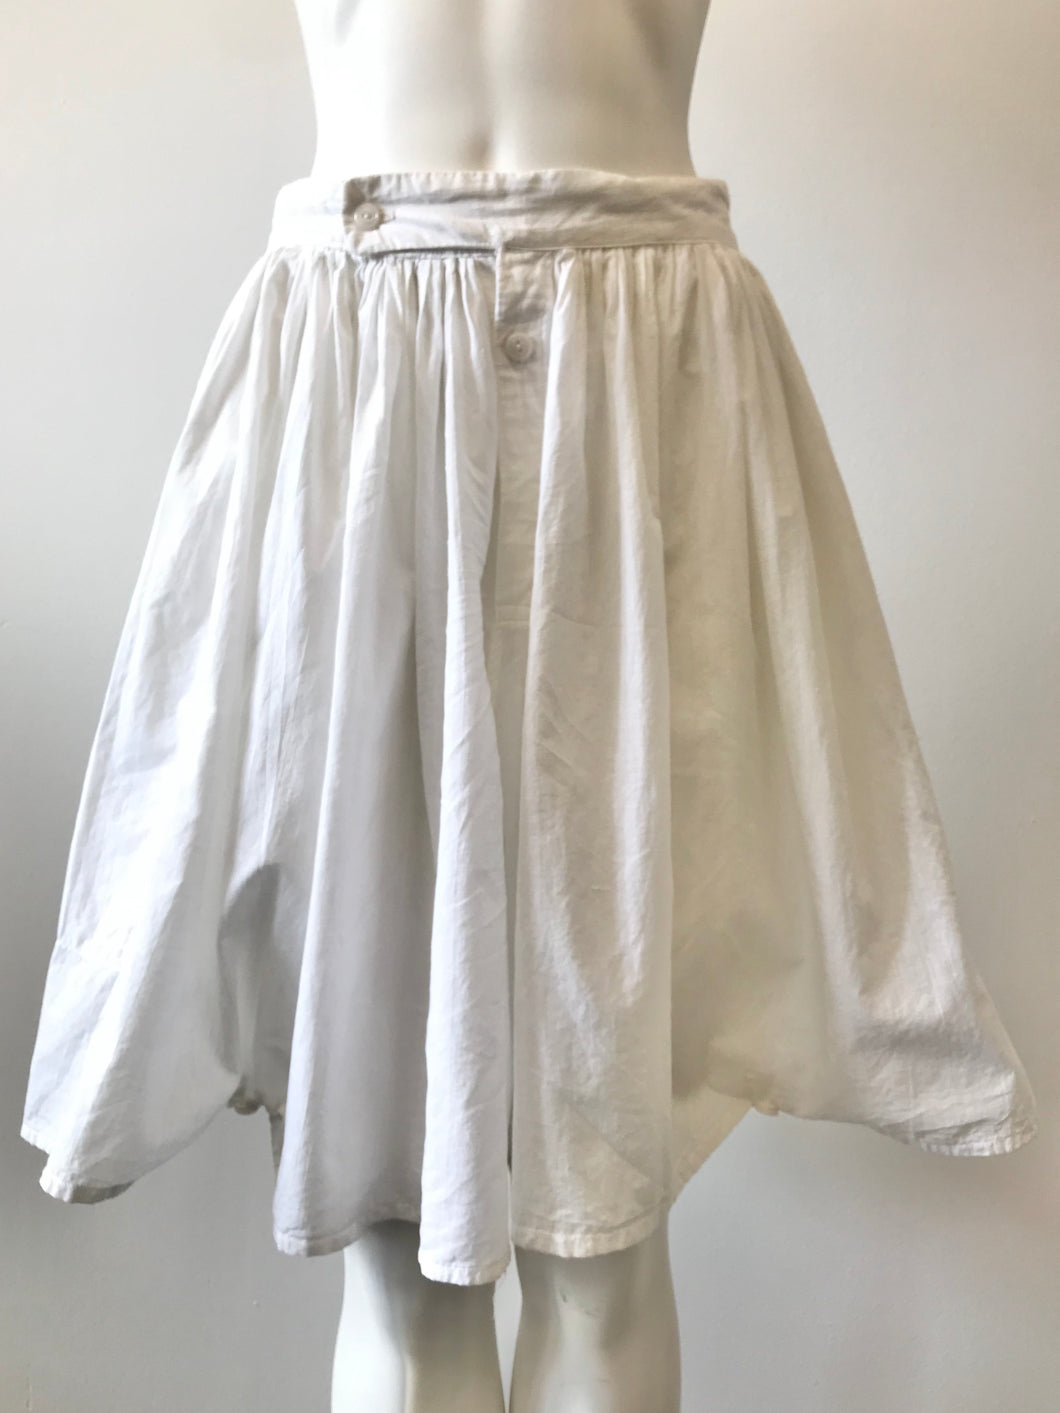 1981 White Pirate Bloomers by World's End Vivienne Westwood & Malcom McLaren